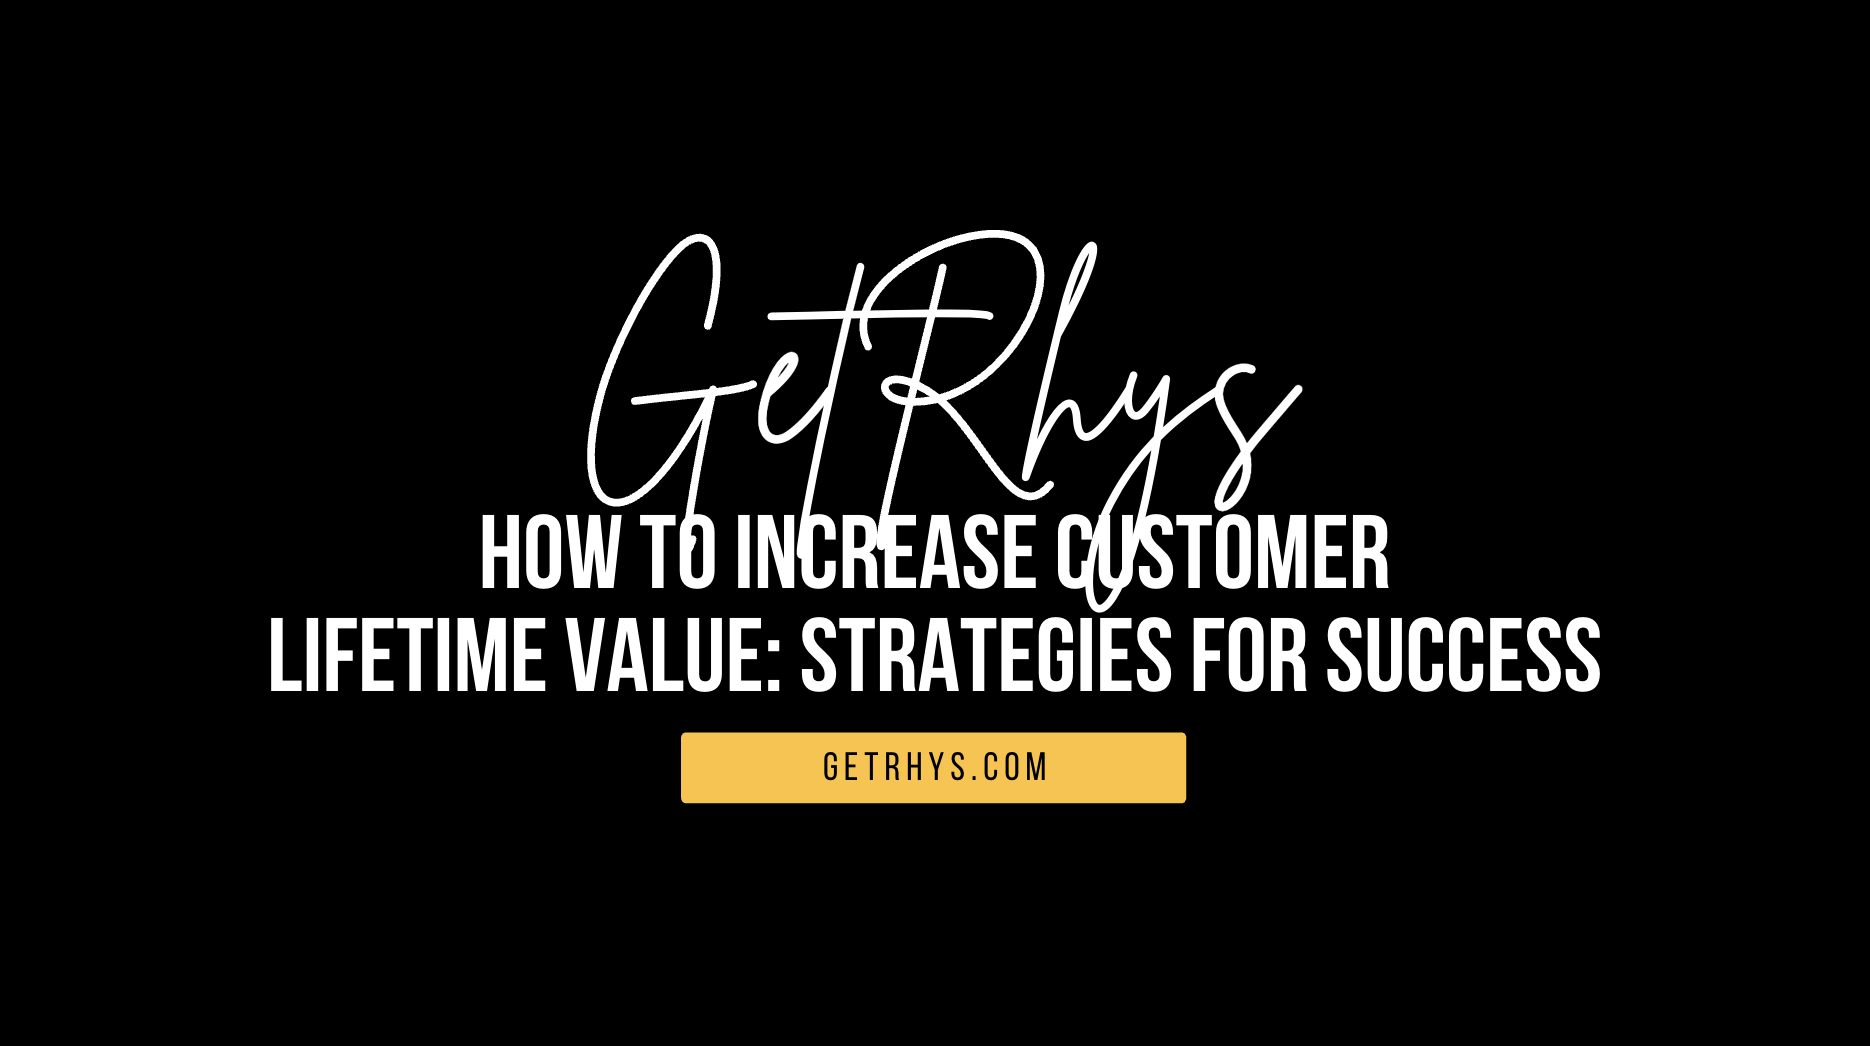 How to Increase Customer Lifetime Value: Strategies for Success